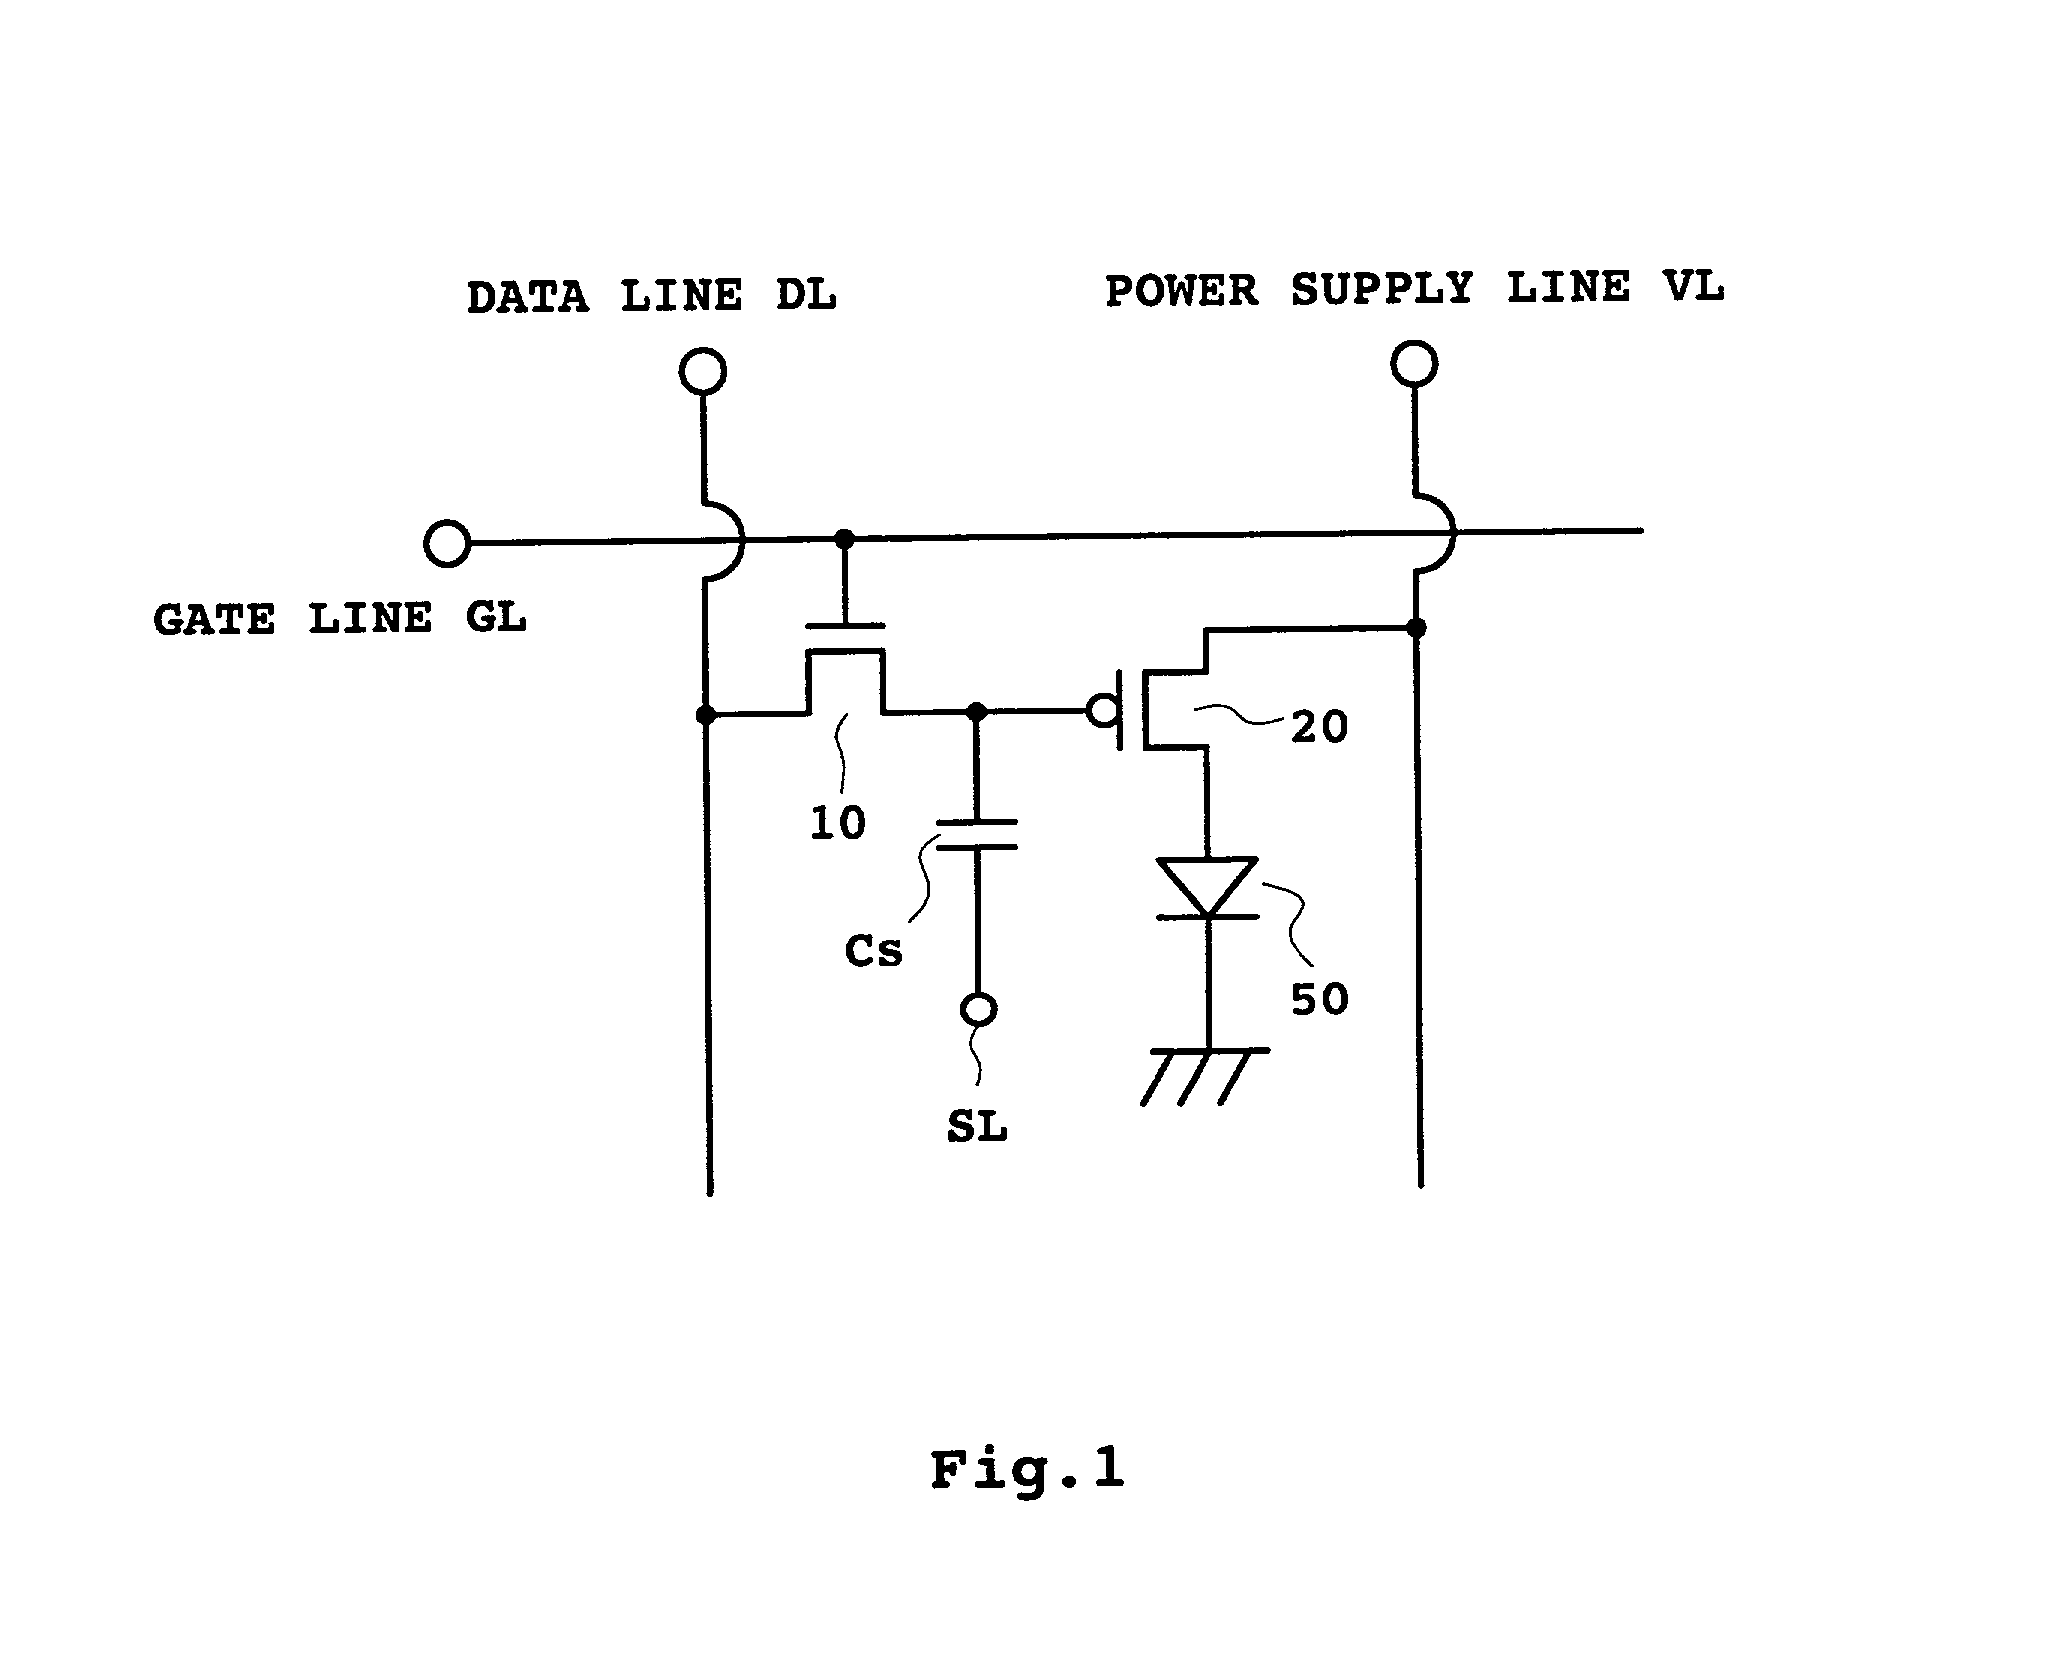 Contact between element to be driven and thin film transistor for supplying power to element to be driven